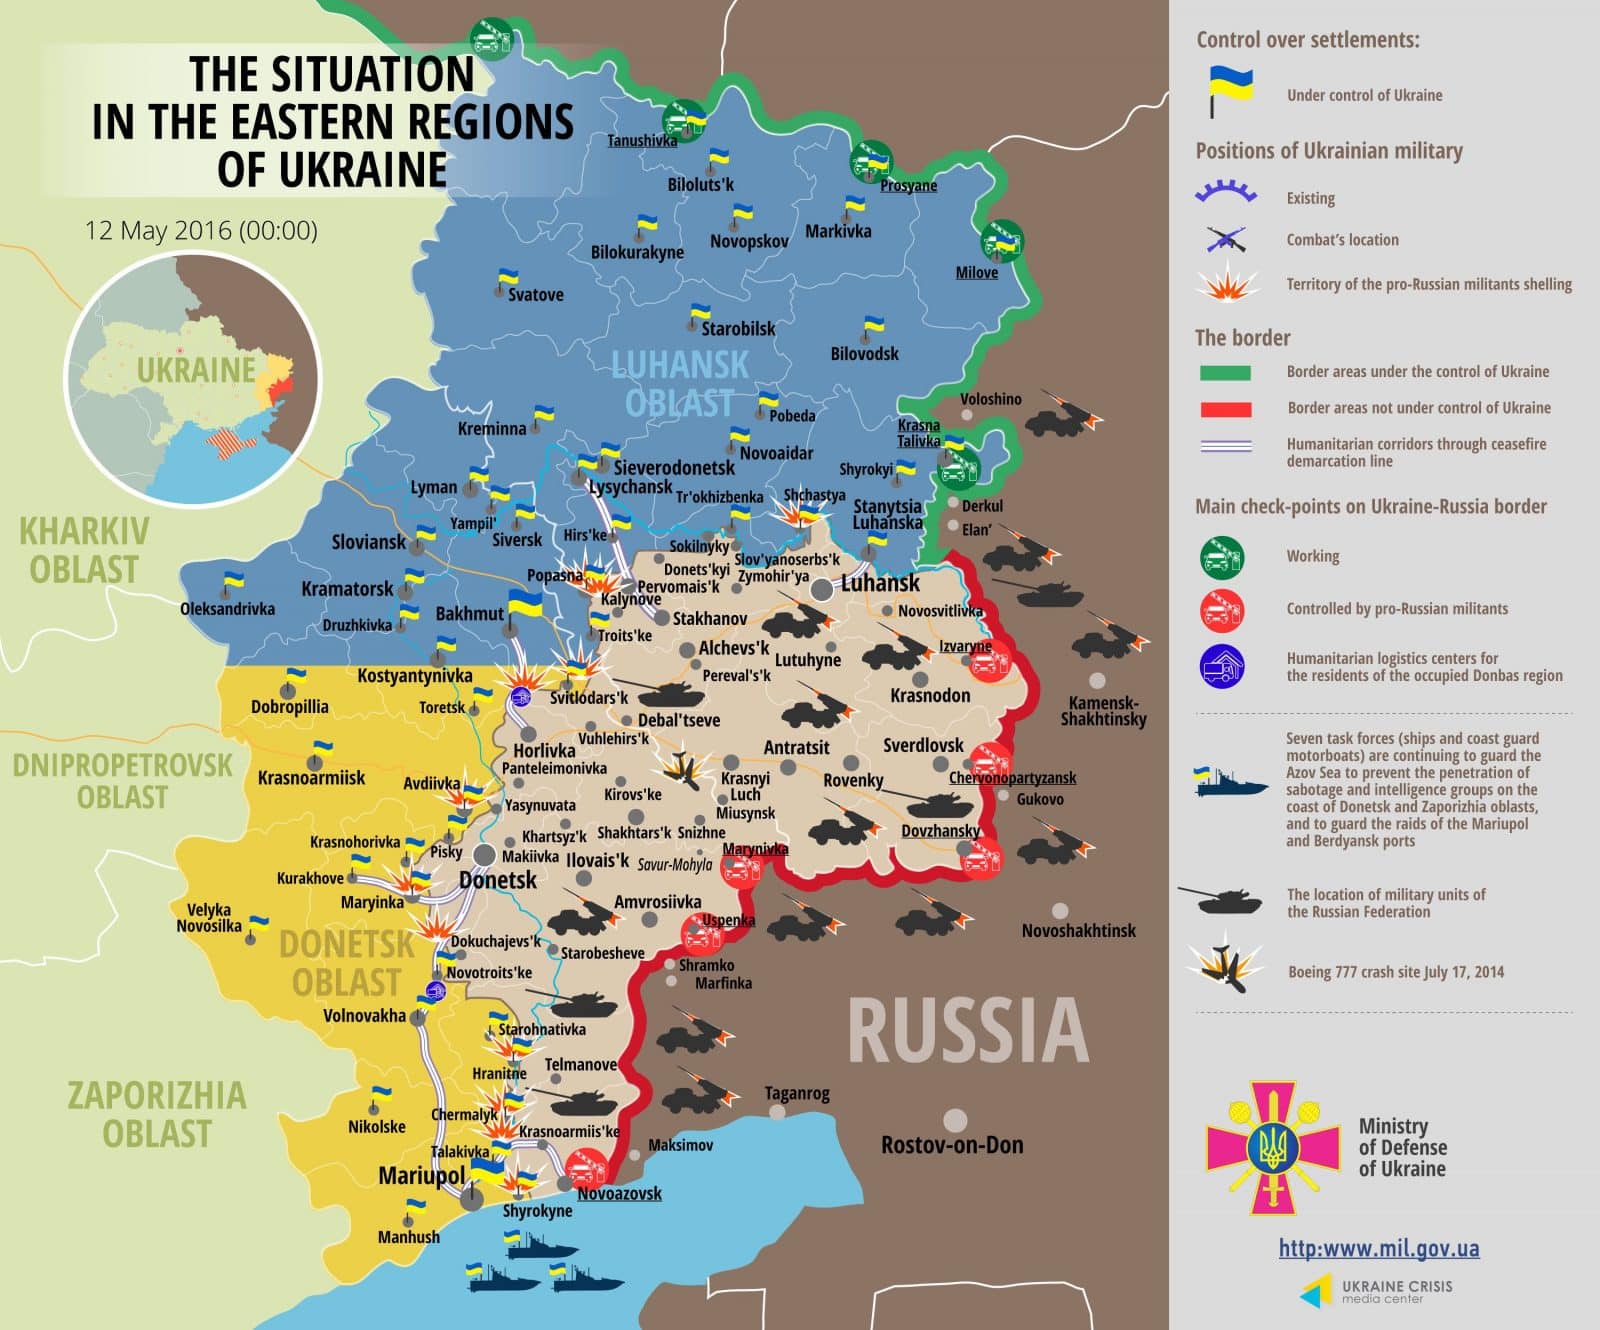 Russian militants attack Ukraine forces 15 times in last day, hot spot near Mariupol